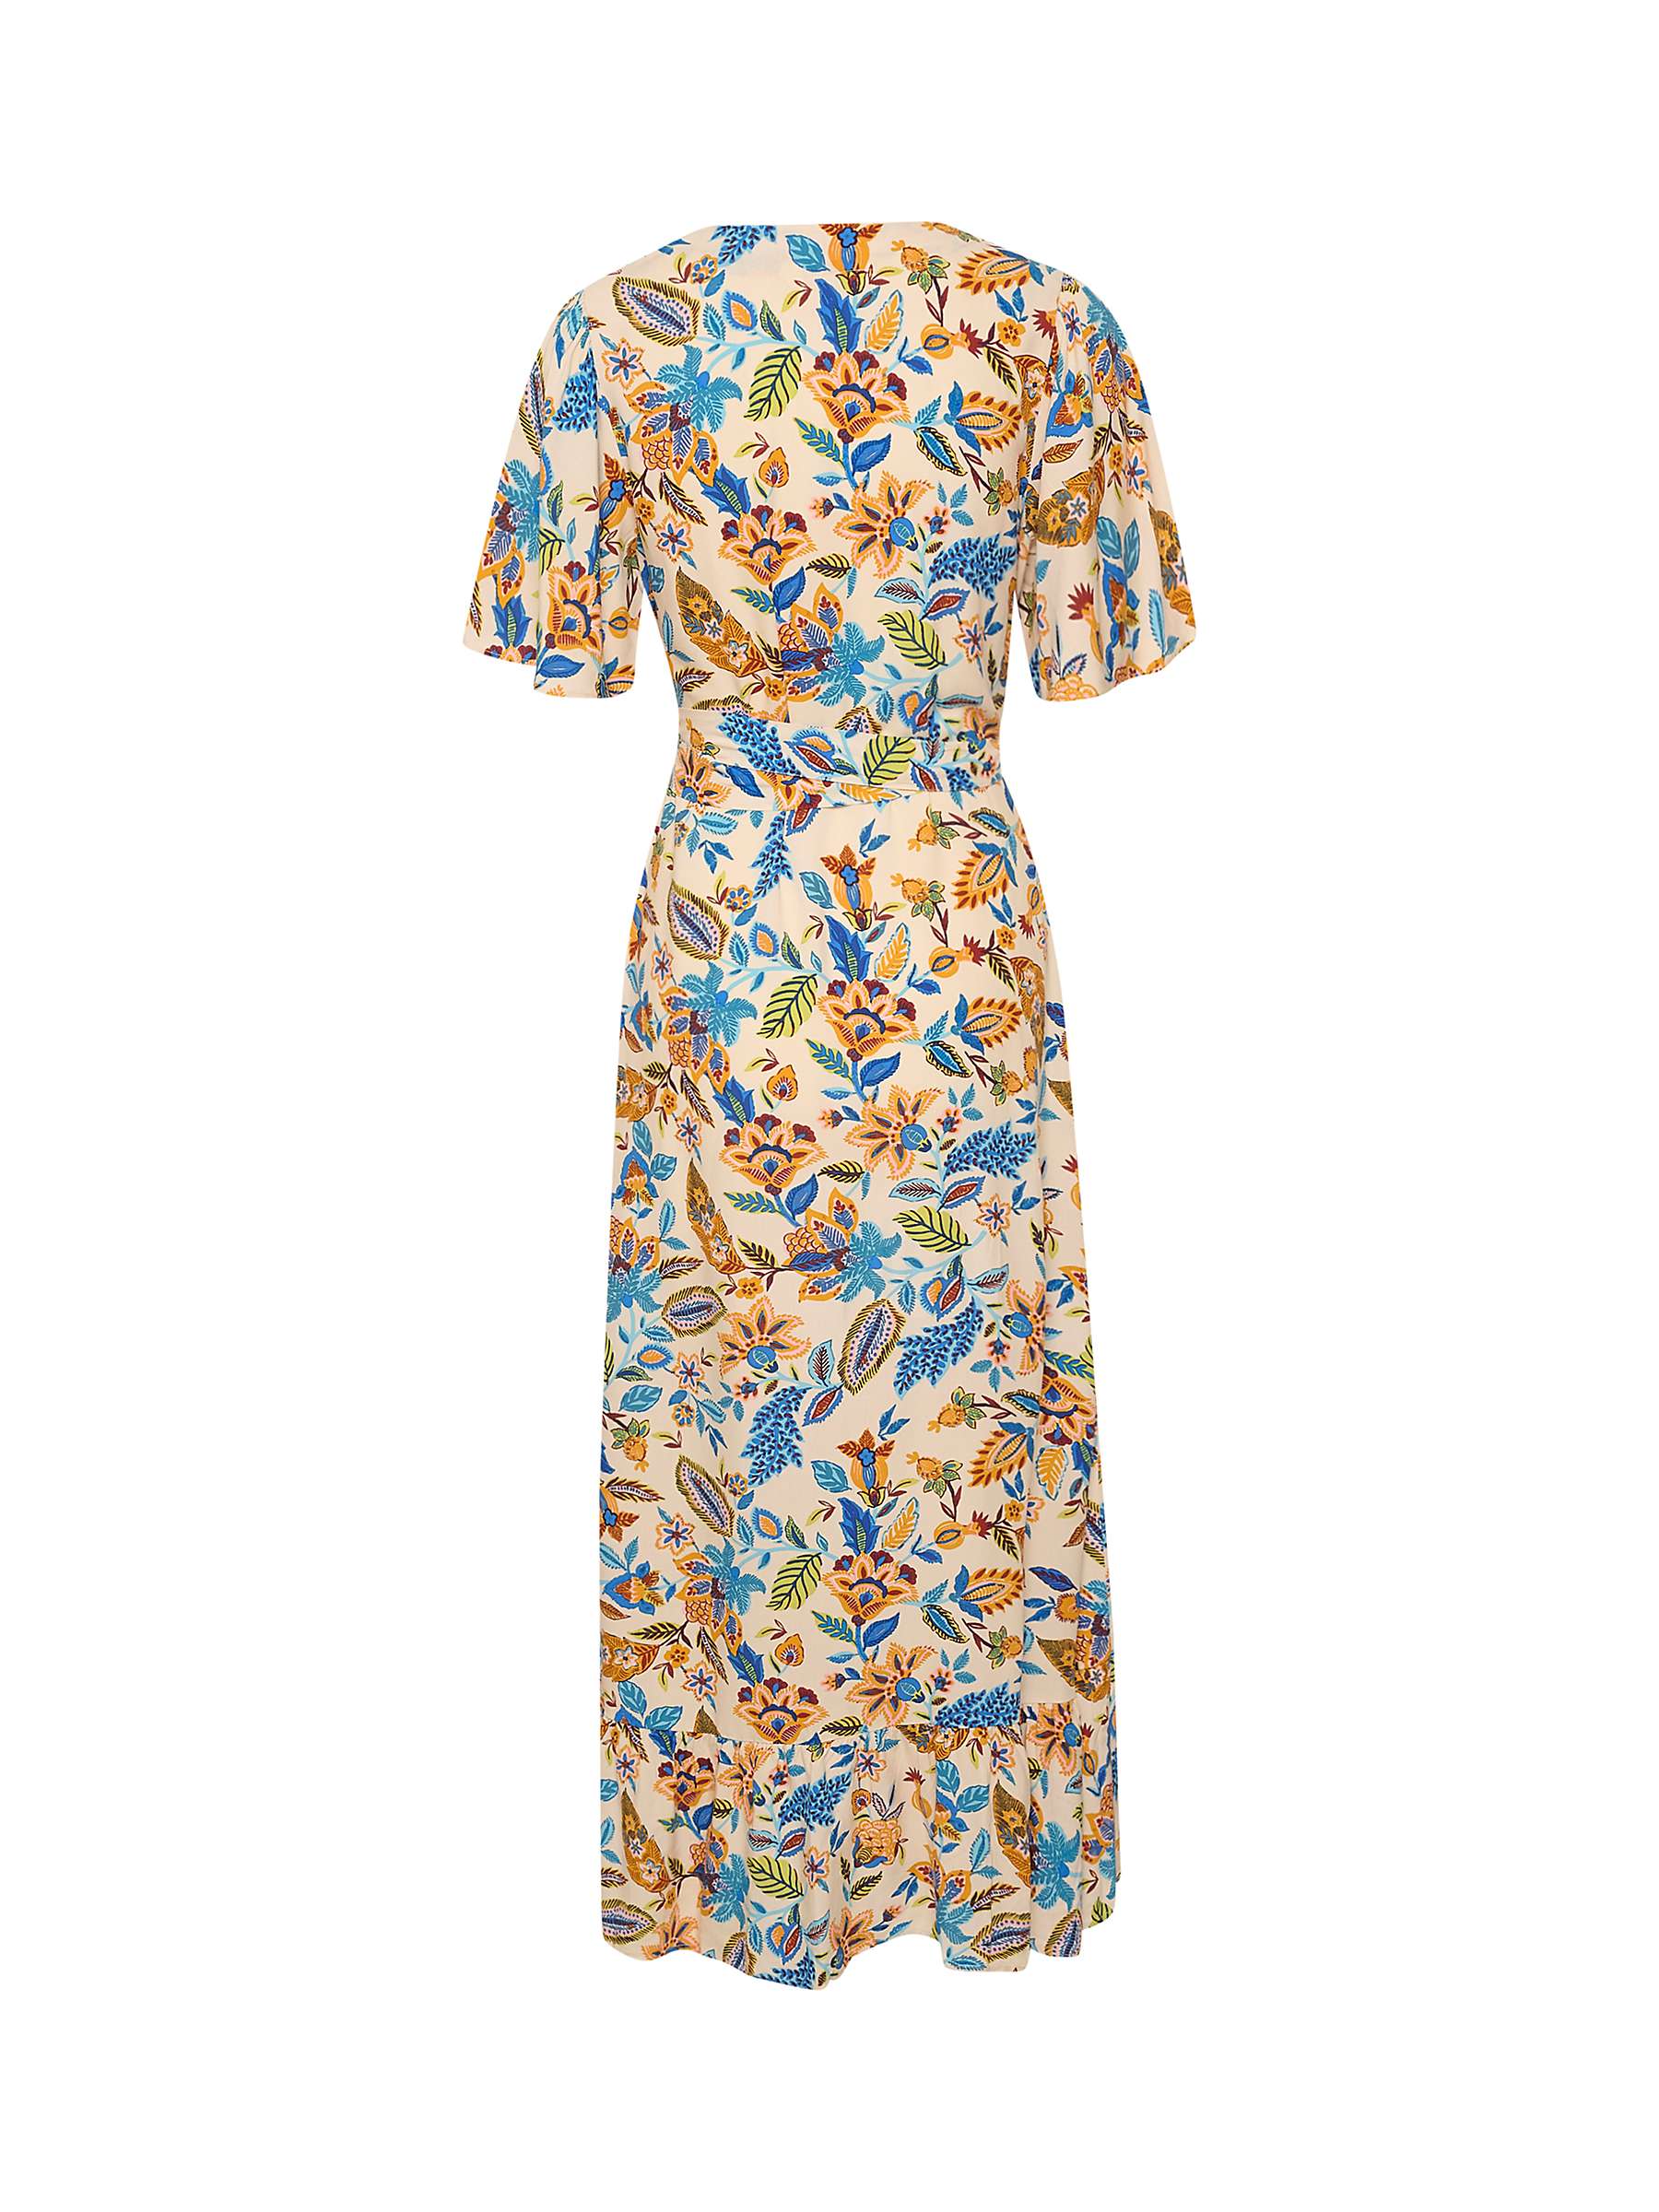 Buy Part Two Clarina Short Sleeve Wrap Dress, Blue Online at johnlewis.com